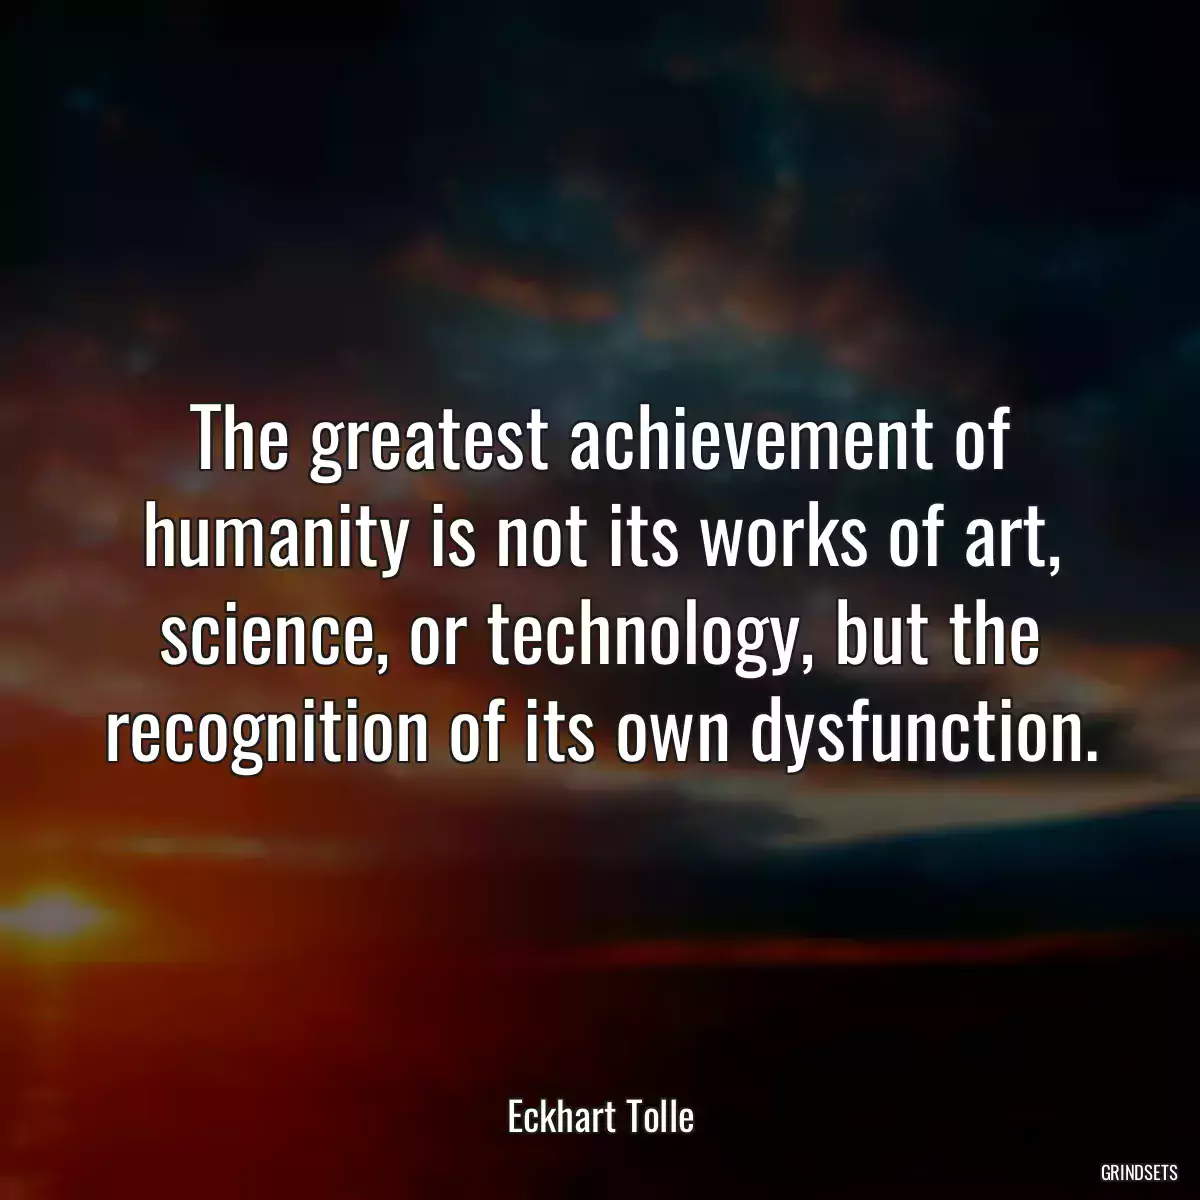 The greatest achievement of humanity is not its works of art, science, or technology, but the recognition of its own dysfunction.